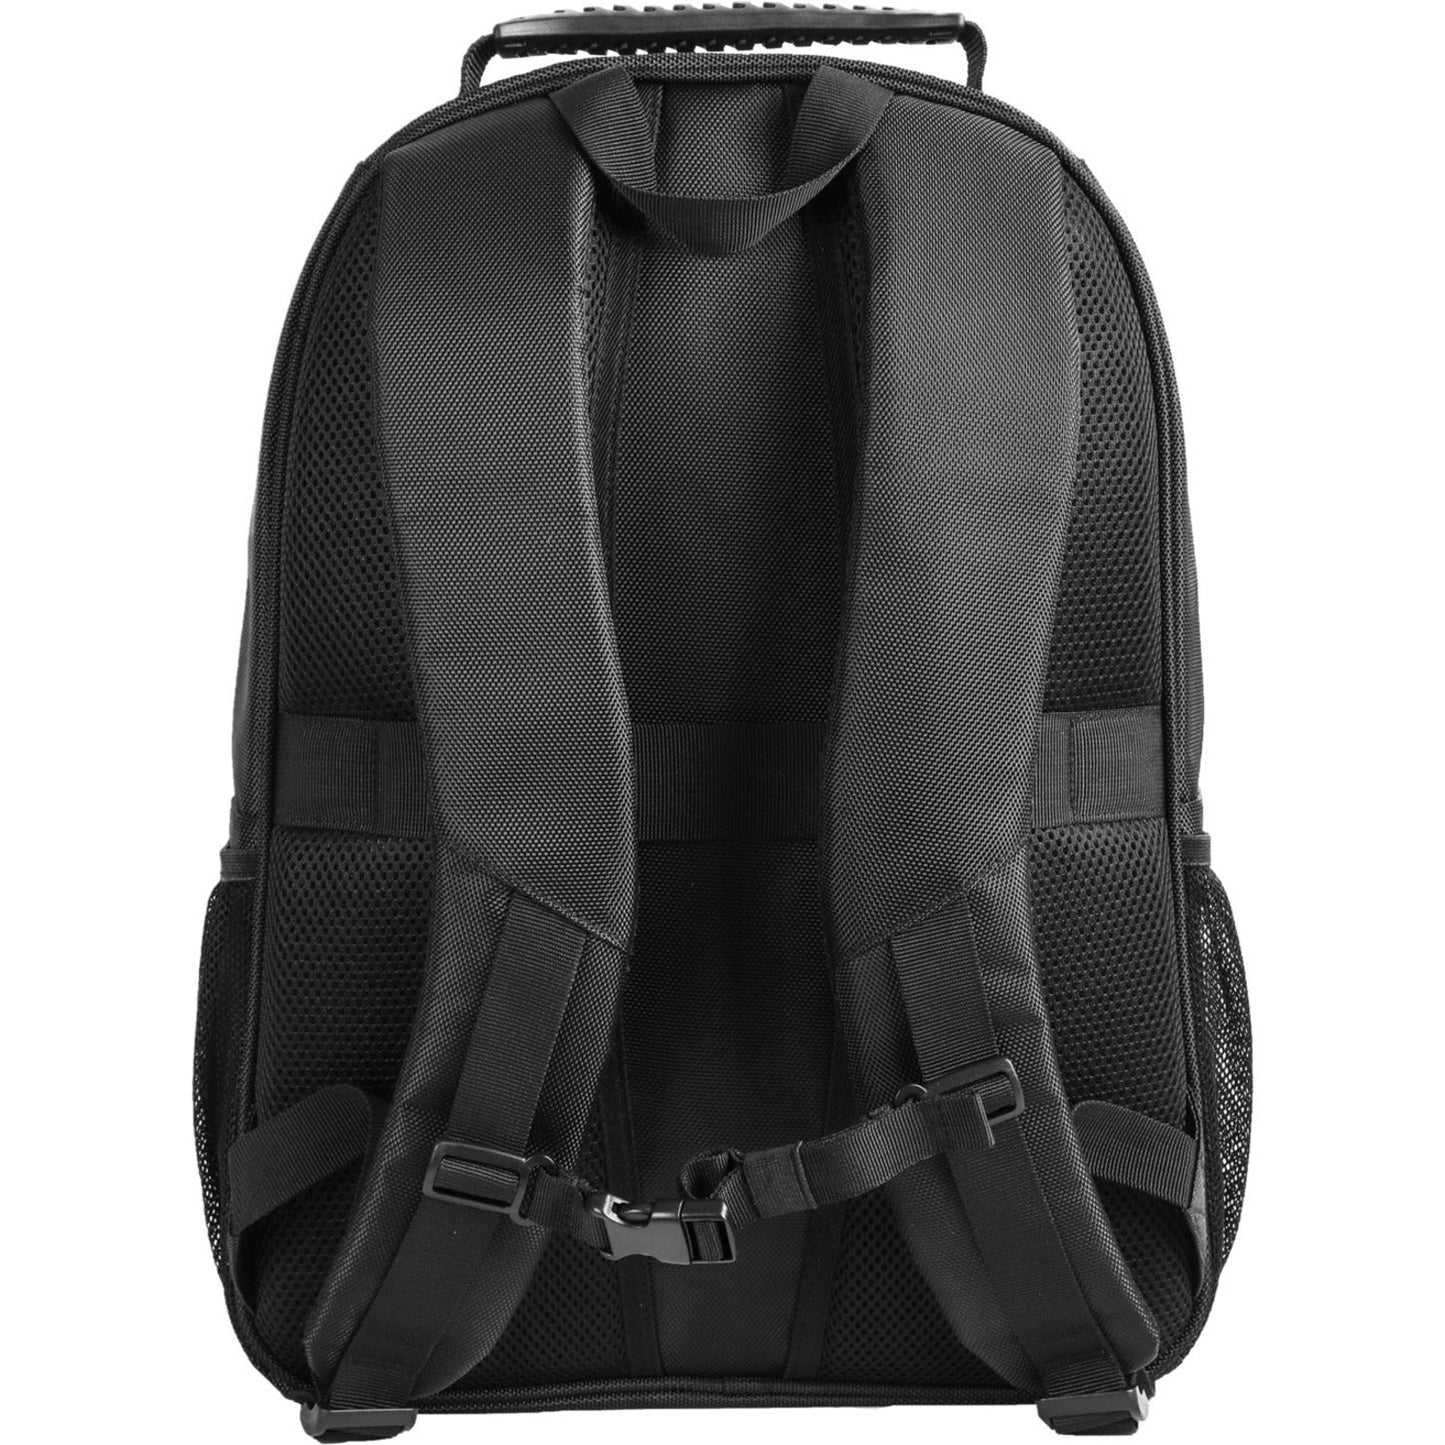 V7 Professional CBPX16-BLK Carrying Case (Backpack) for 15.6" to 16.1" Notebook - Black